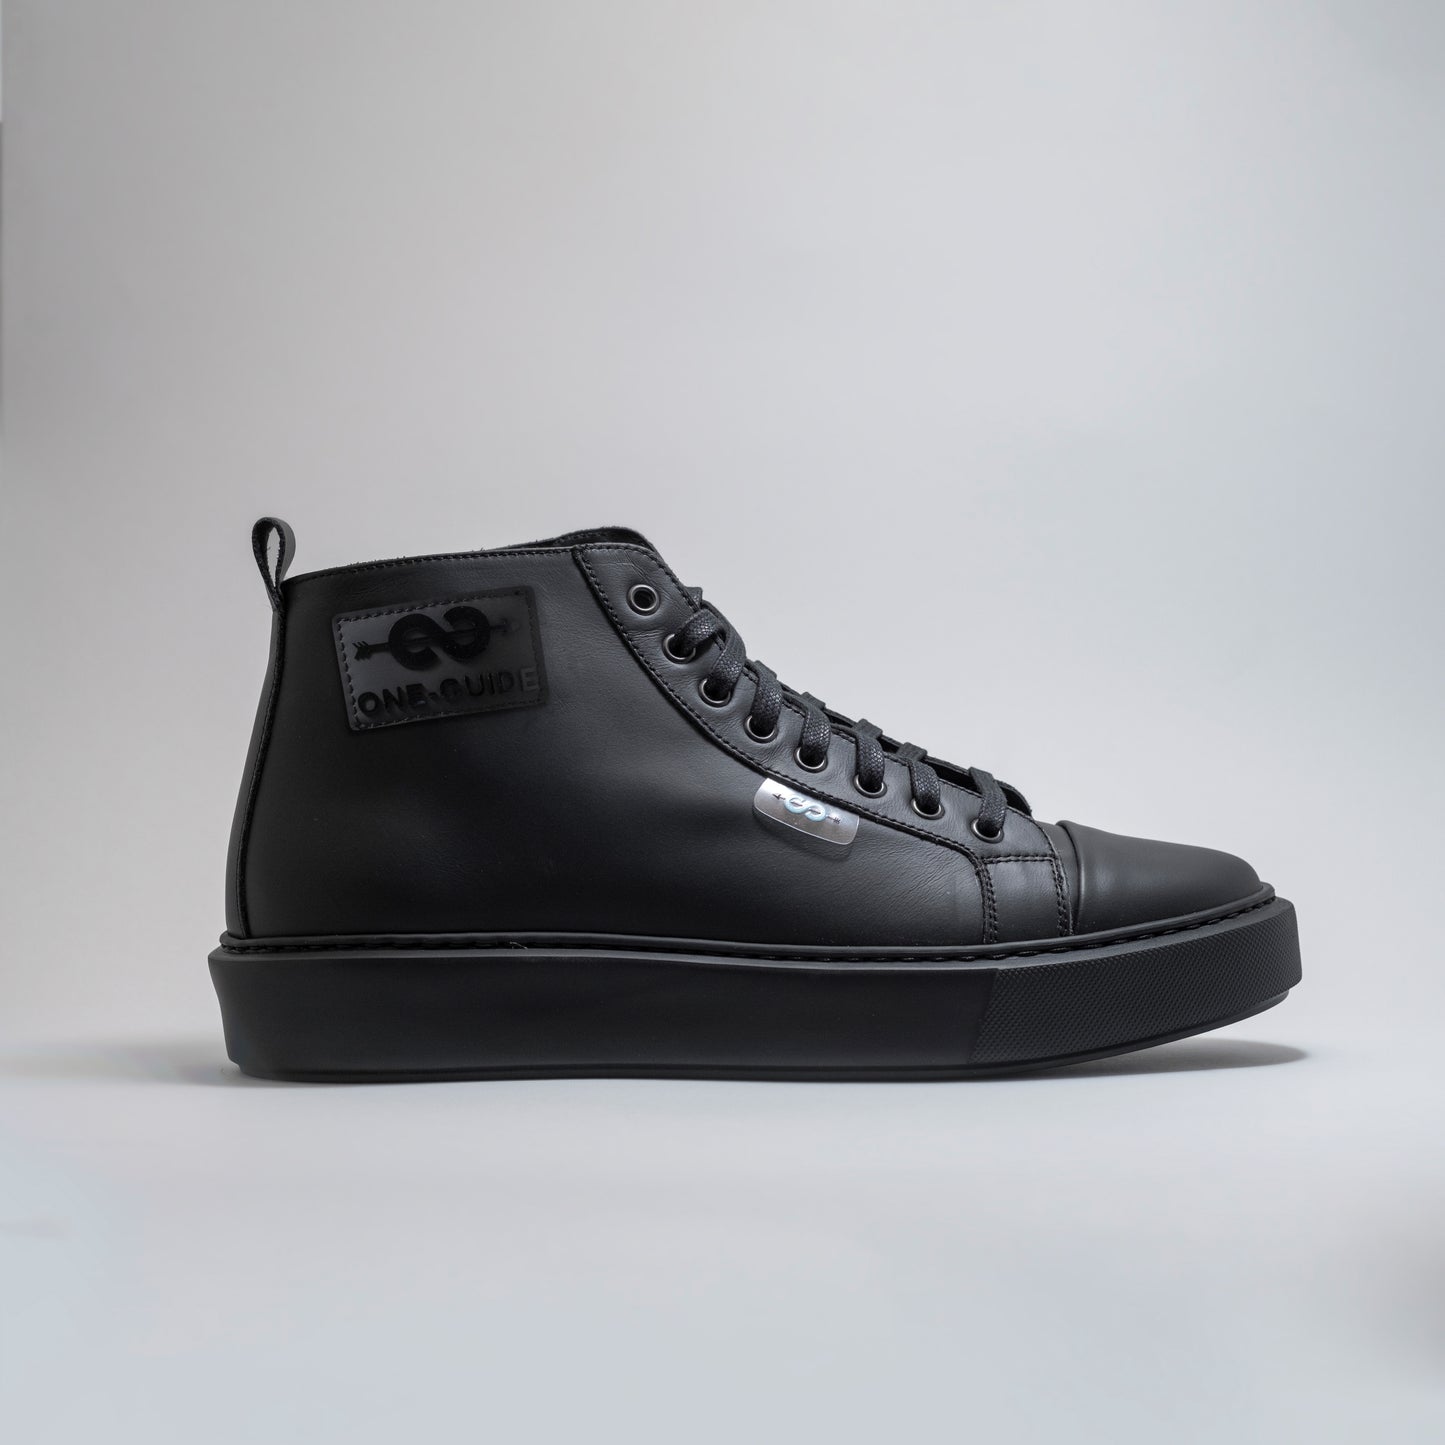 Sneakers ONE-GUIDE MIRAGE black